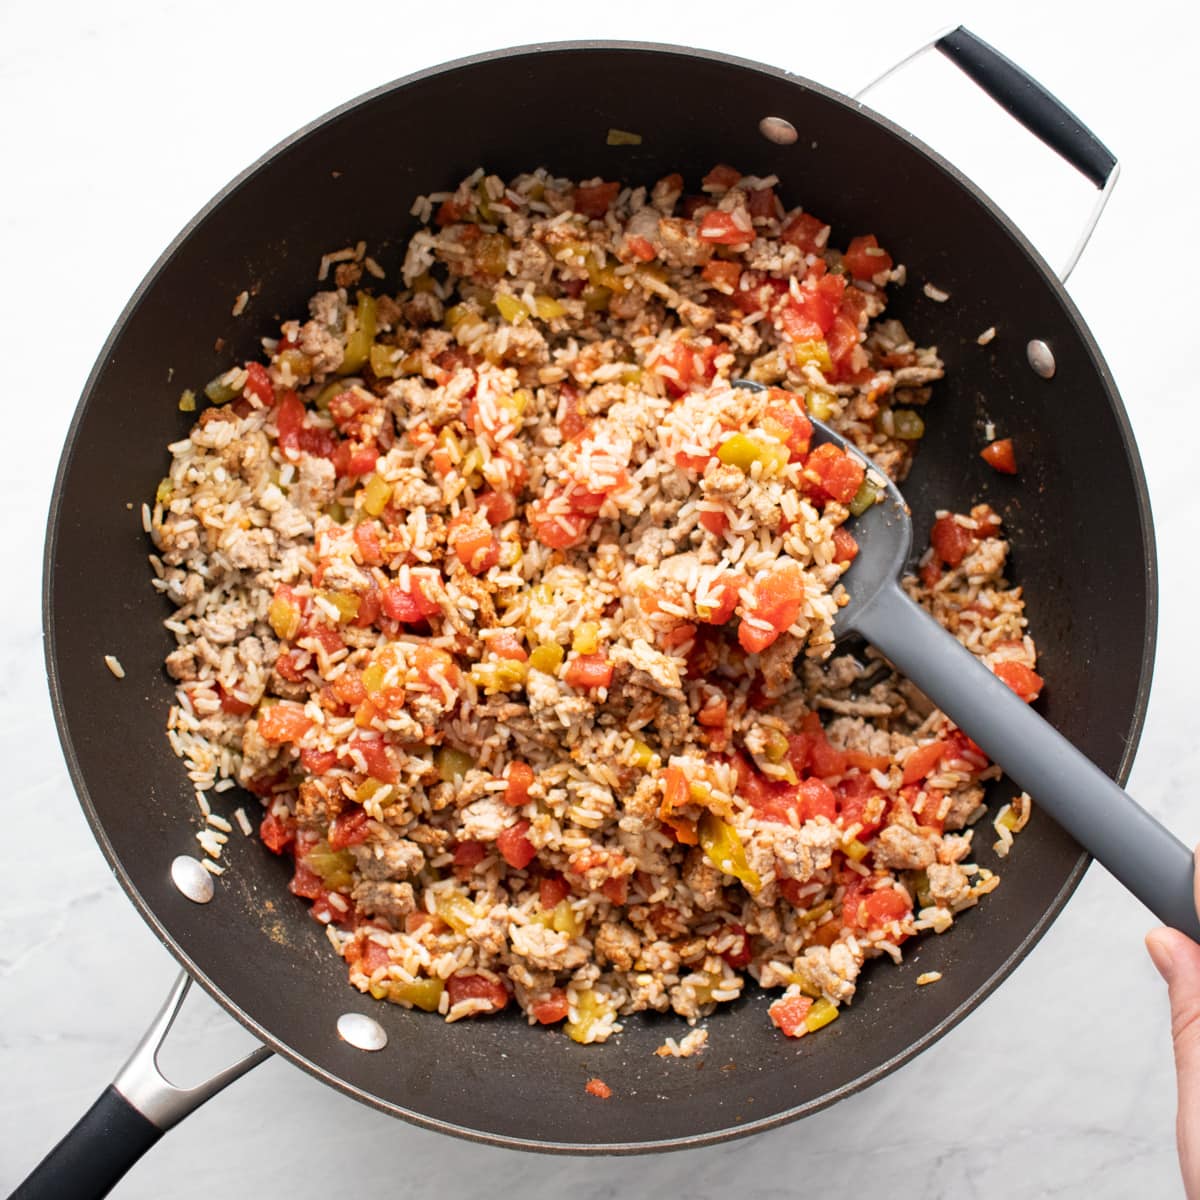 Brown rice, canned tomatoes, diced chiles, and spices added to browned ground turkey in skillet.